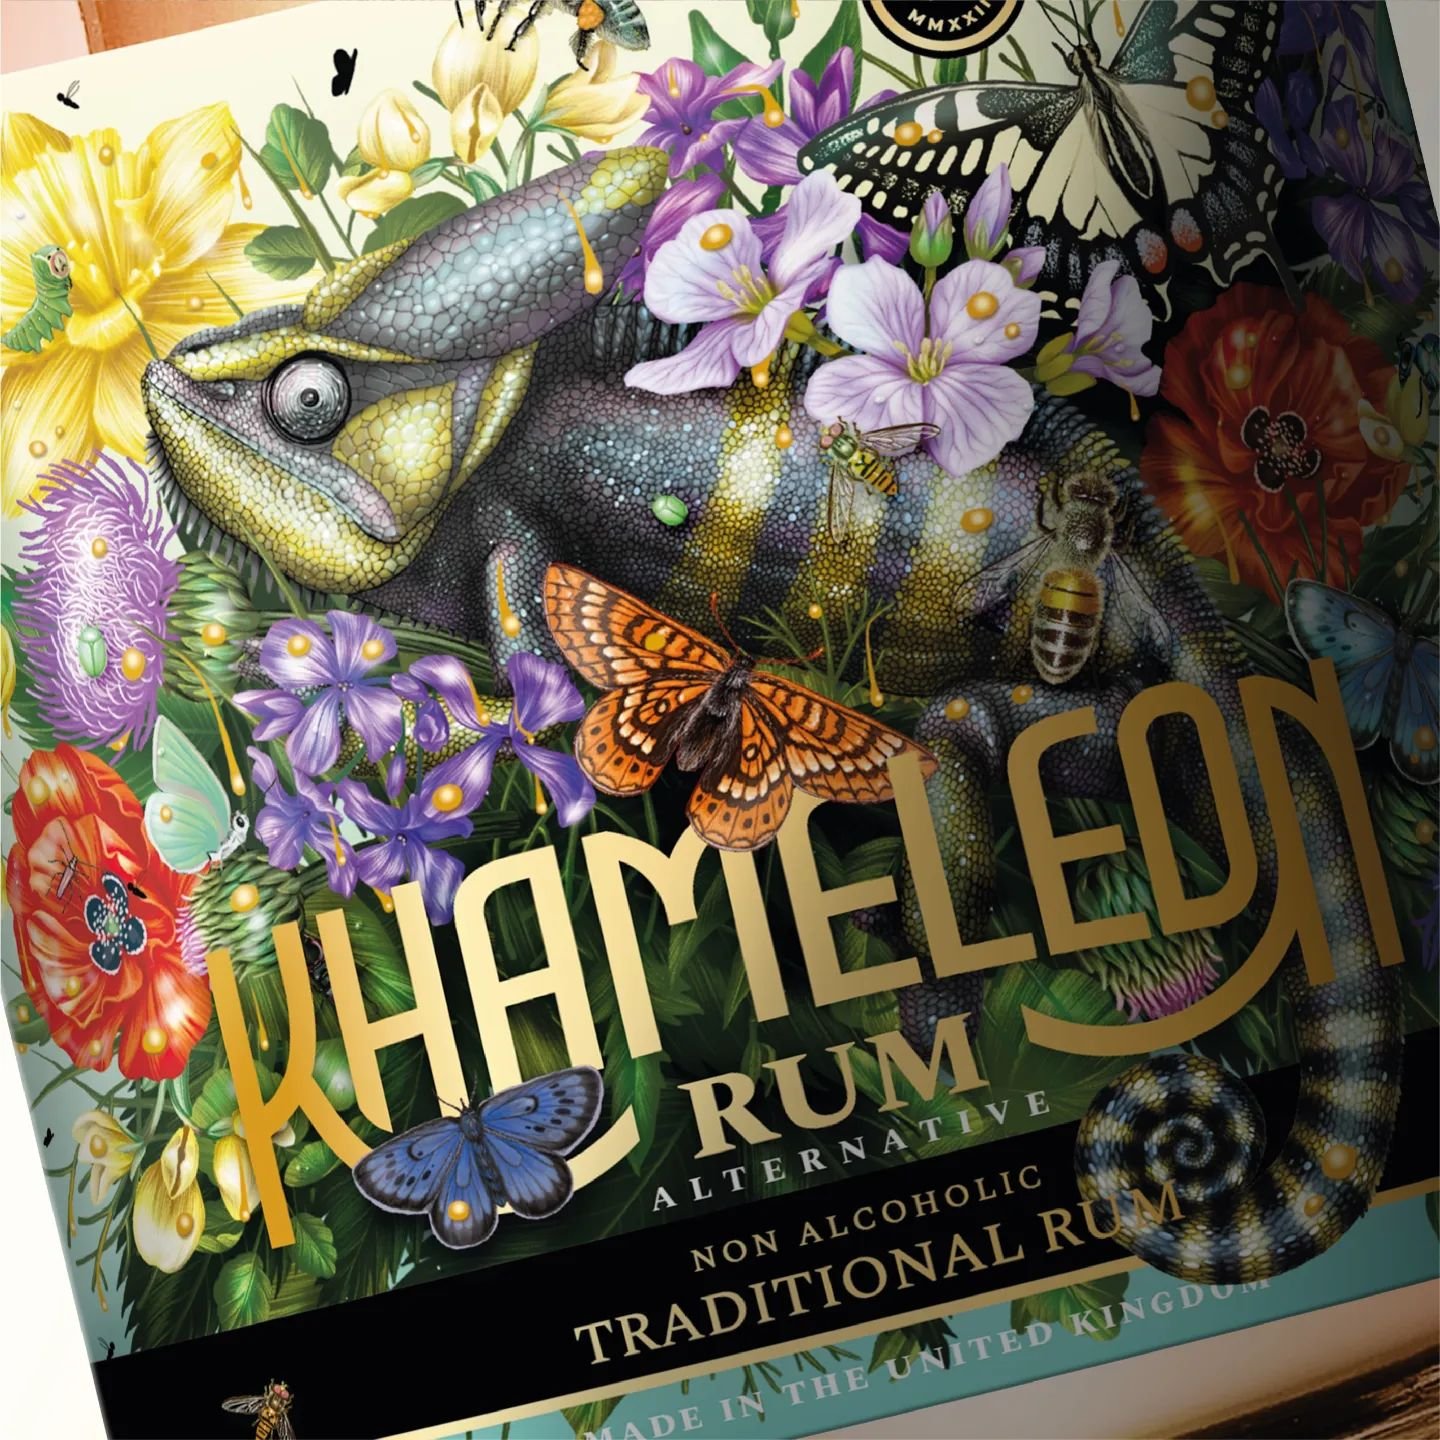 Label concept for Khameleon brand. Inspired by pollinators. The chameleon became a bee for this cause surrounded by other pollinators and plants they love.
.
.
.
#brandidentitydesign #logo #beveragebranding #nonalcoholicdrink #nonalcoholicbrand #envi